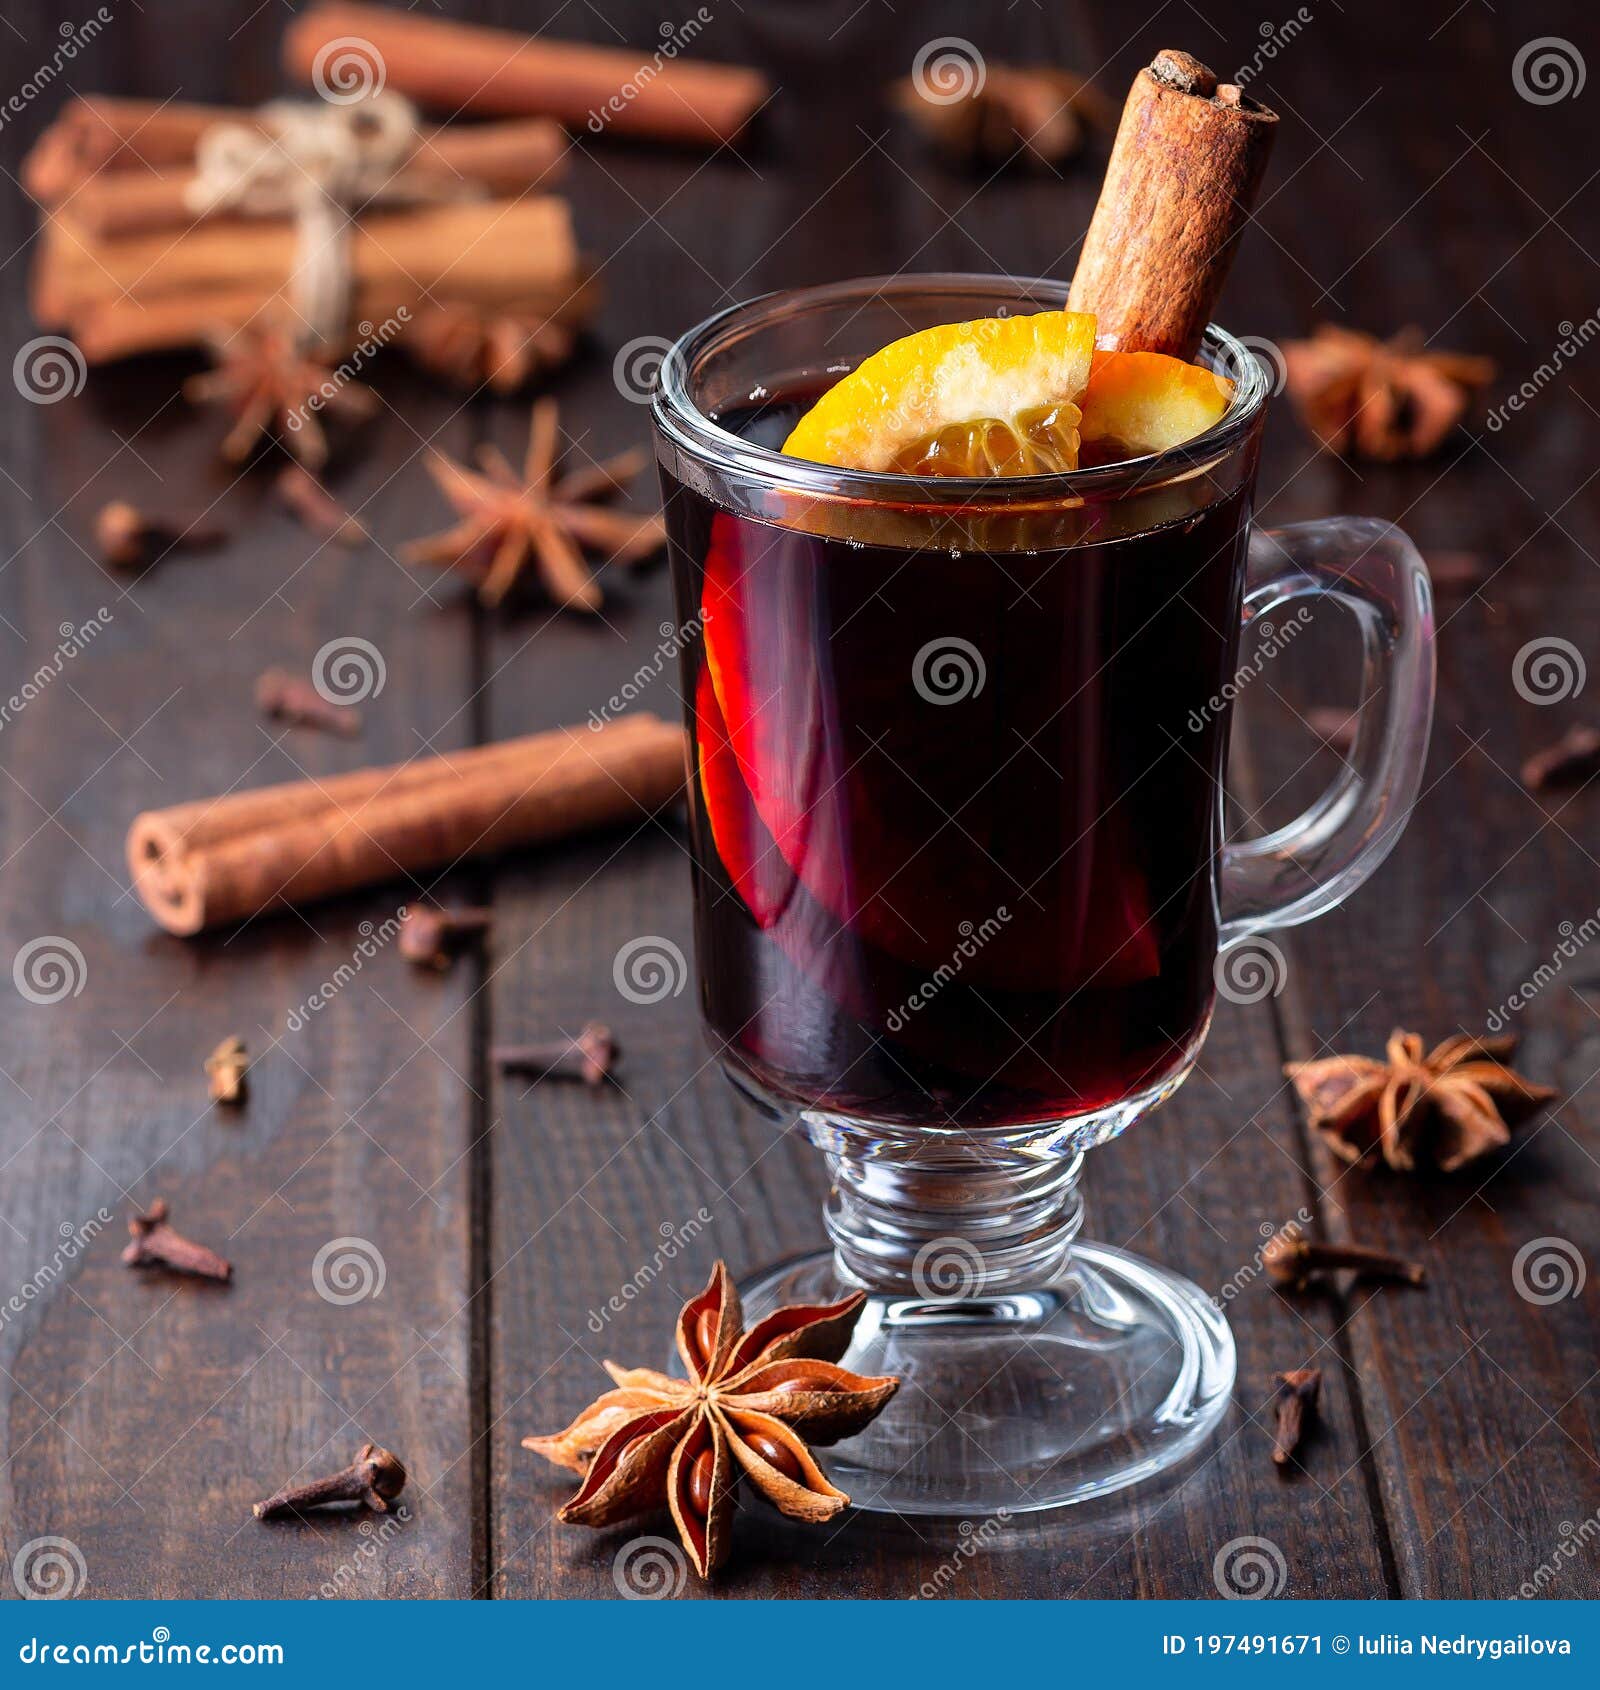 red glogg or mulled wine with orange slices and cinnamon stick on dark wooden background, square format